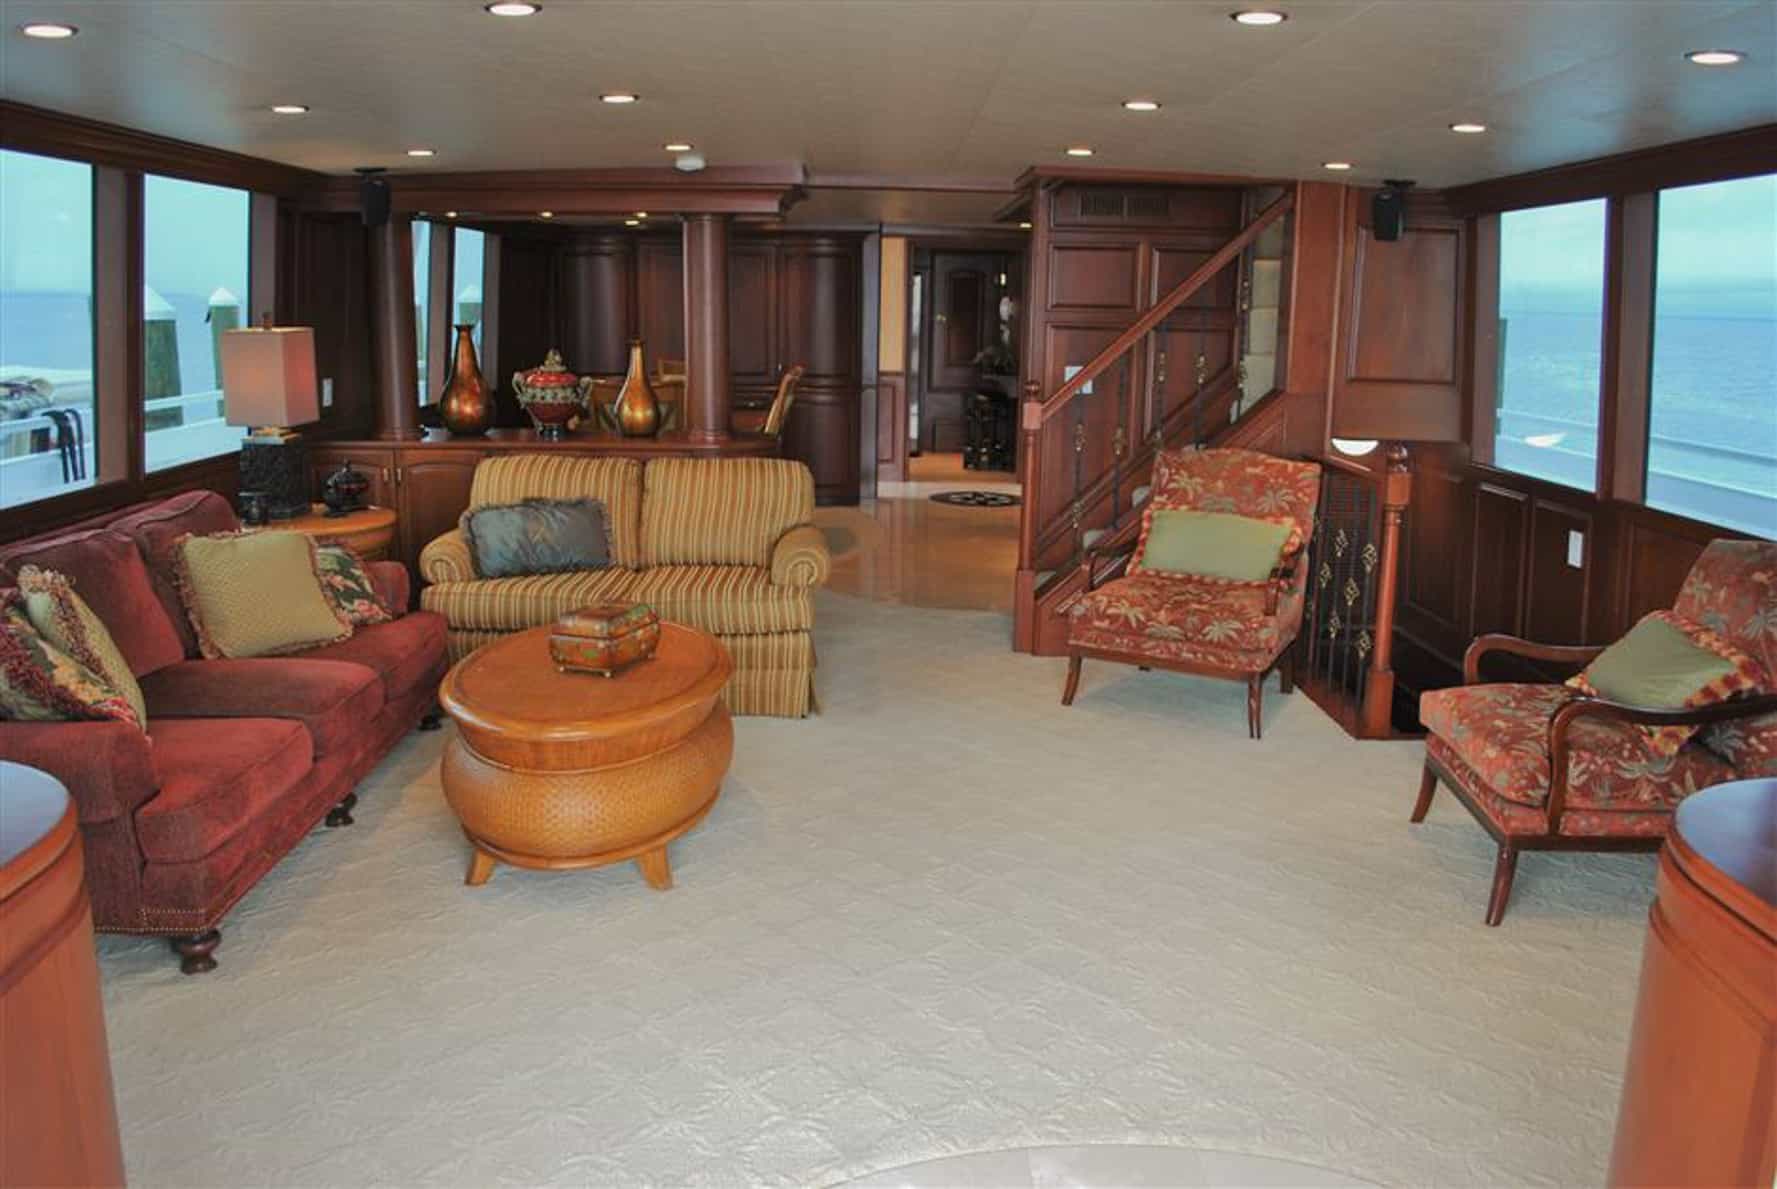 Jenny Lynne 87 Voyager - Luxury Yacht Interior Formal Living Room with View to Dining Room